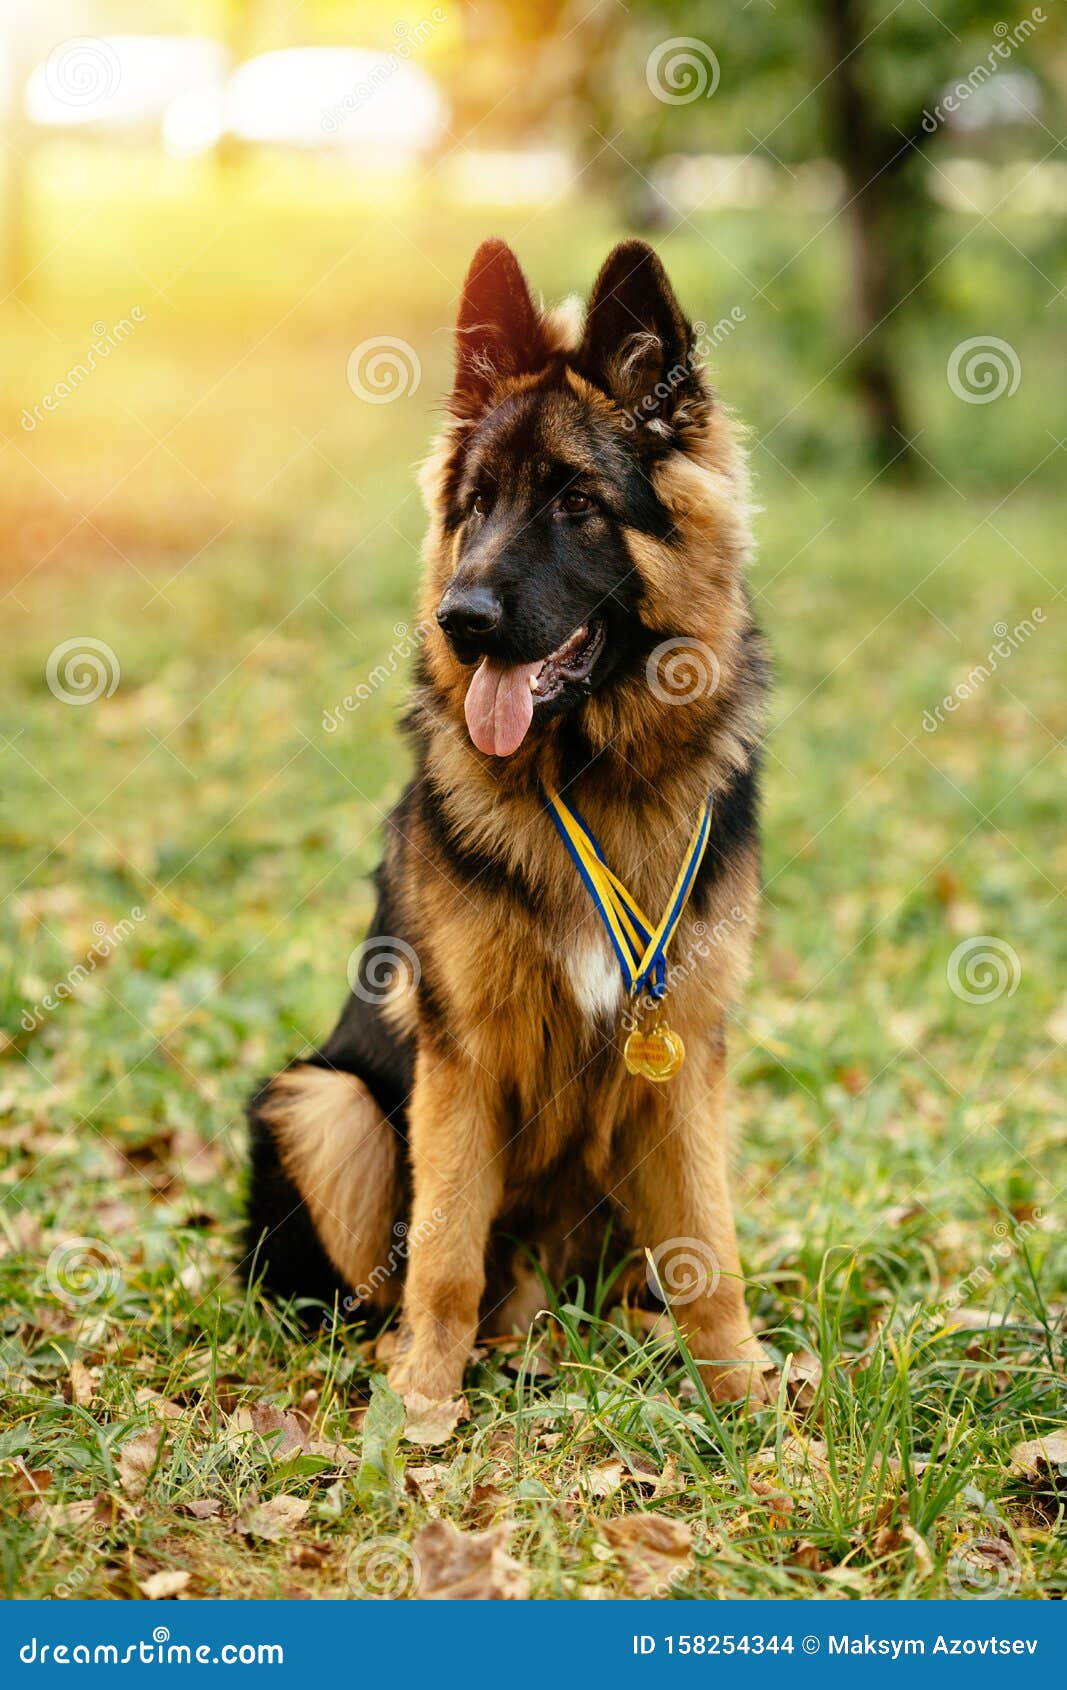 Champion Sits on Grass with Golden Stock - Image of open, golden: 158254344